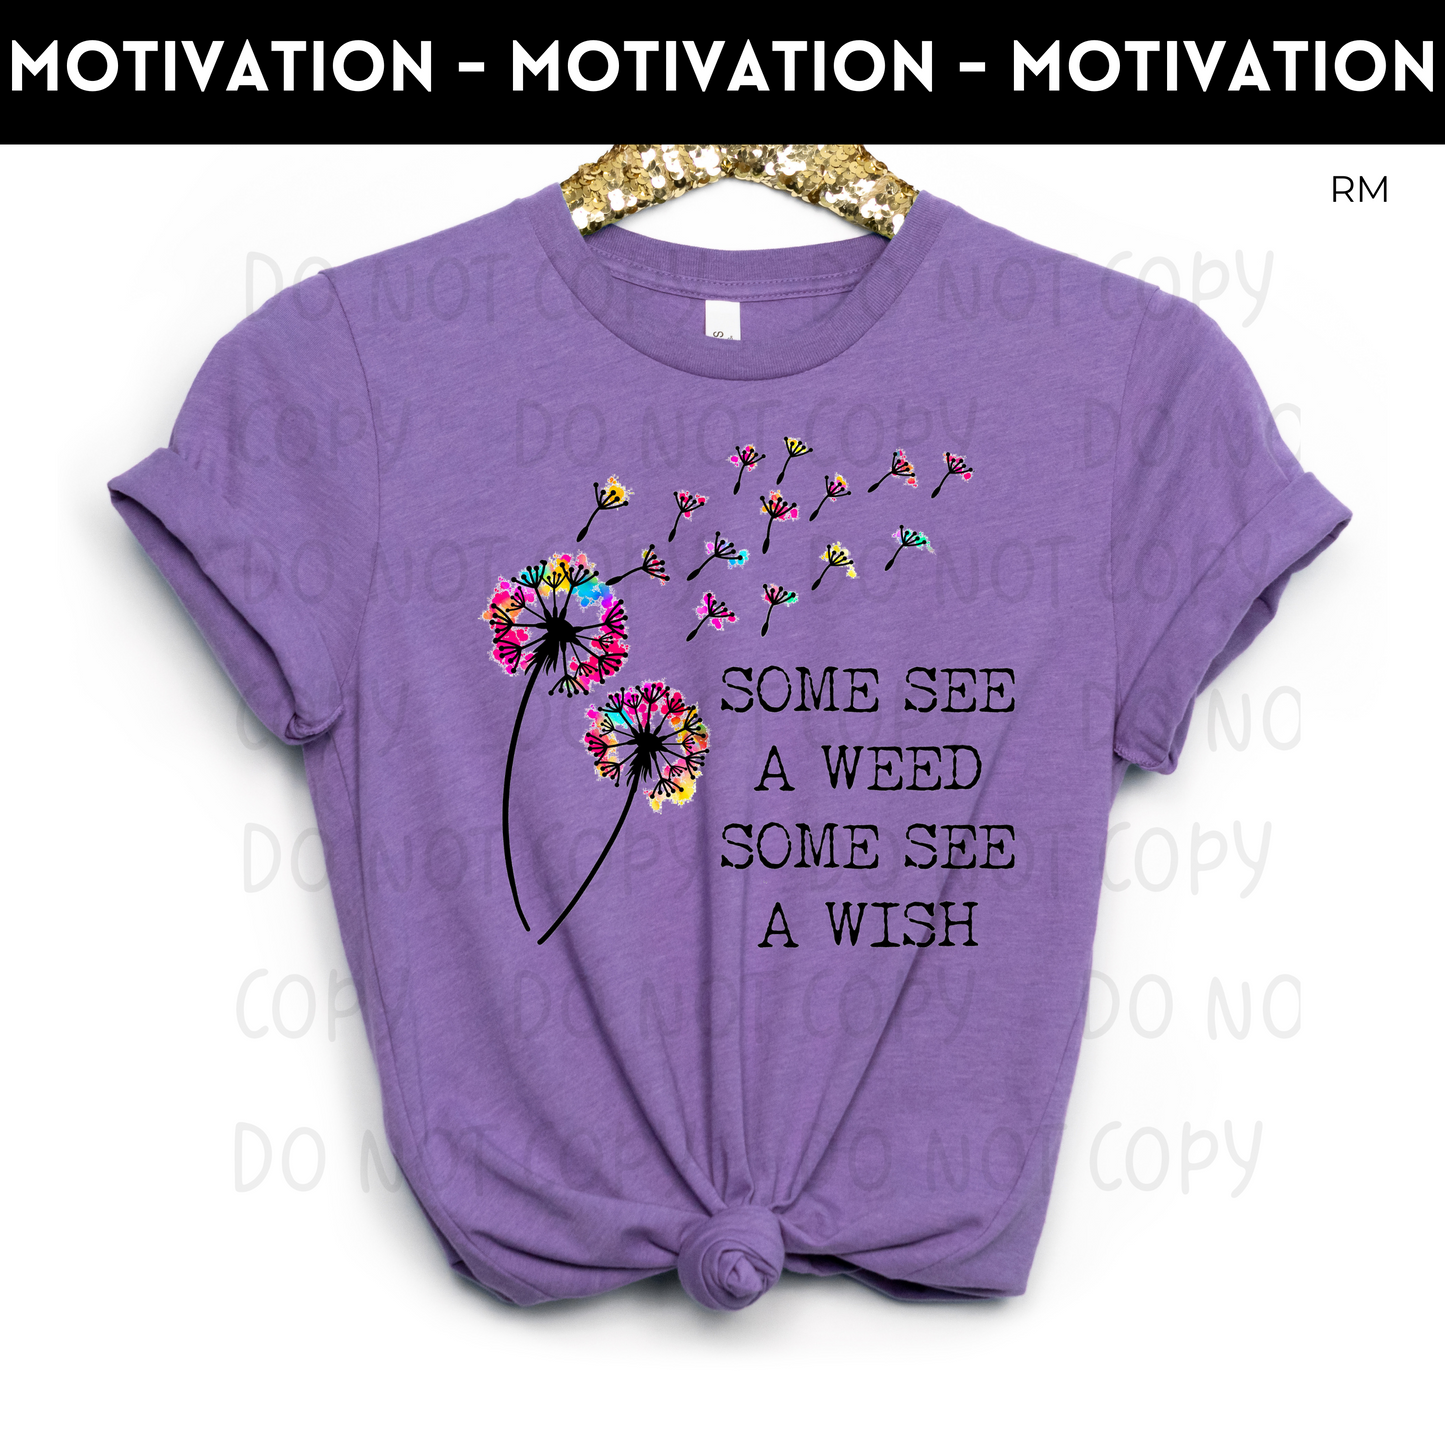 Some See A Weed Adult Shirt- Inspirational 238